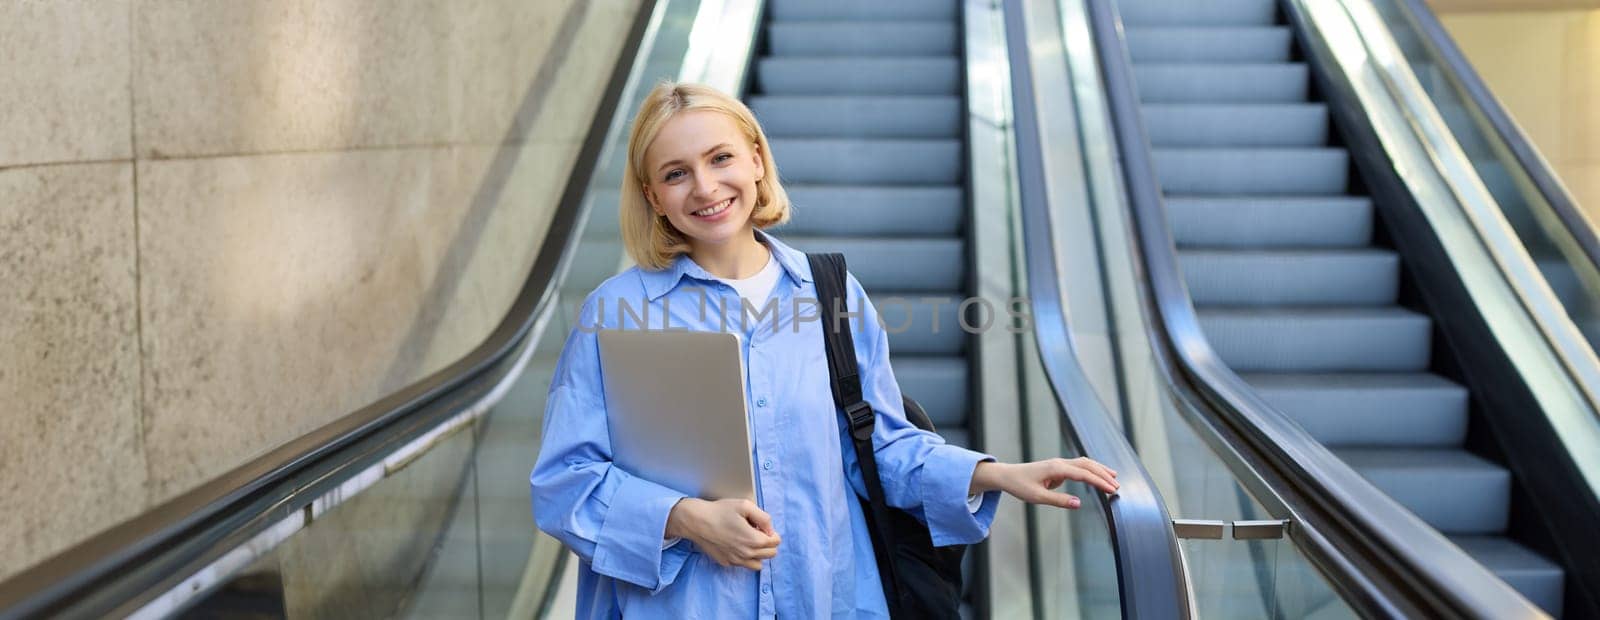 Portrait of smiling, beautiful blond girl, student with laptop and backpack, wearing blue shirt, using escalator, going down, looking confident at camera by Benzoix